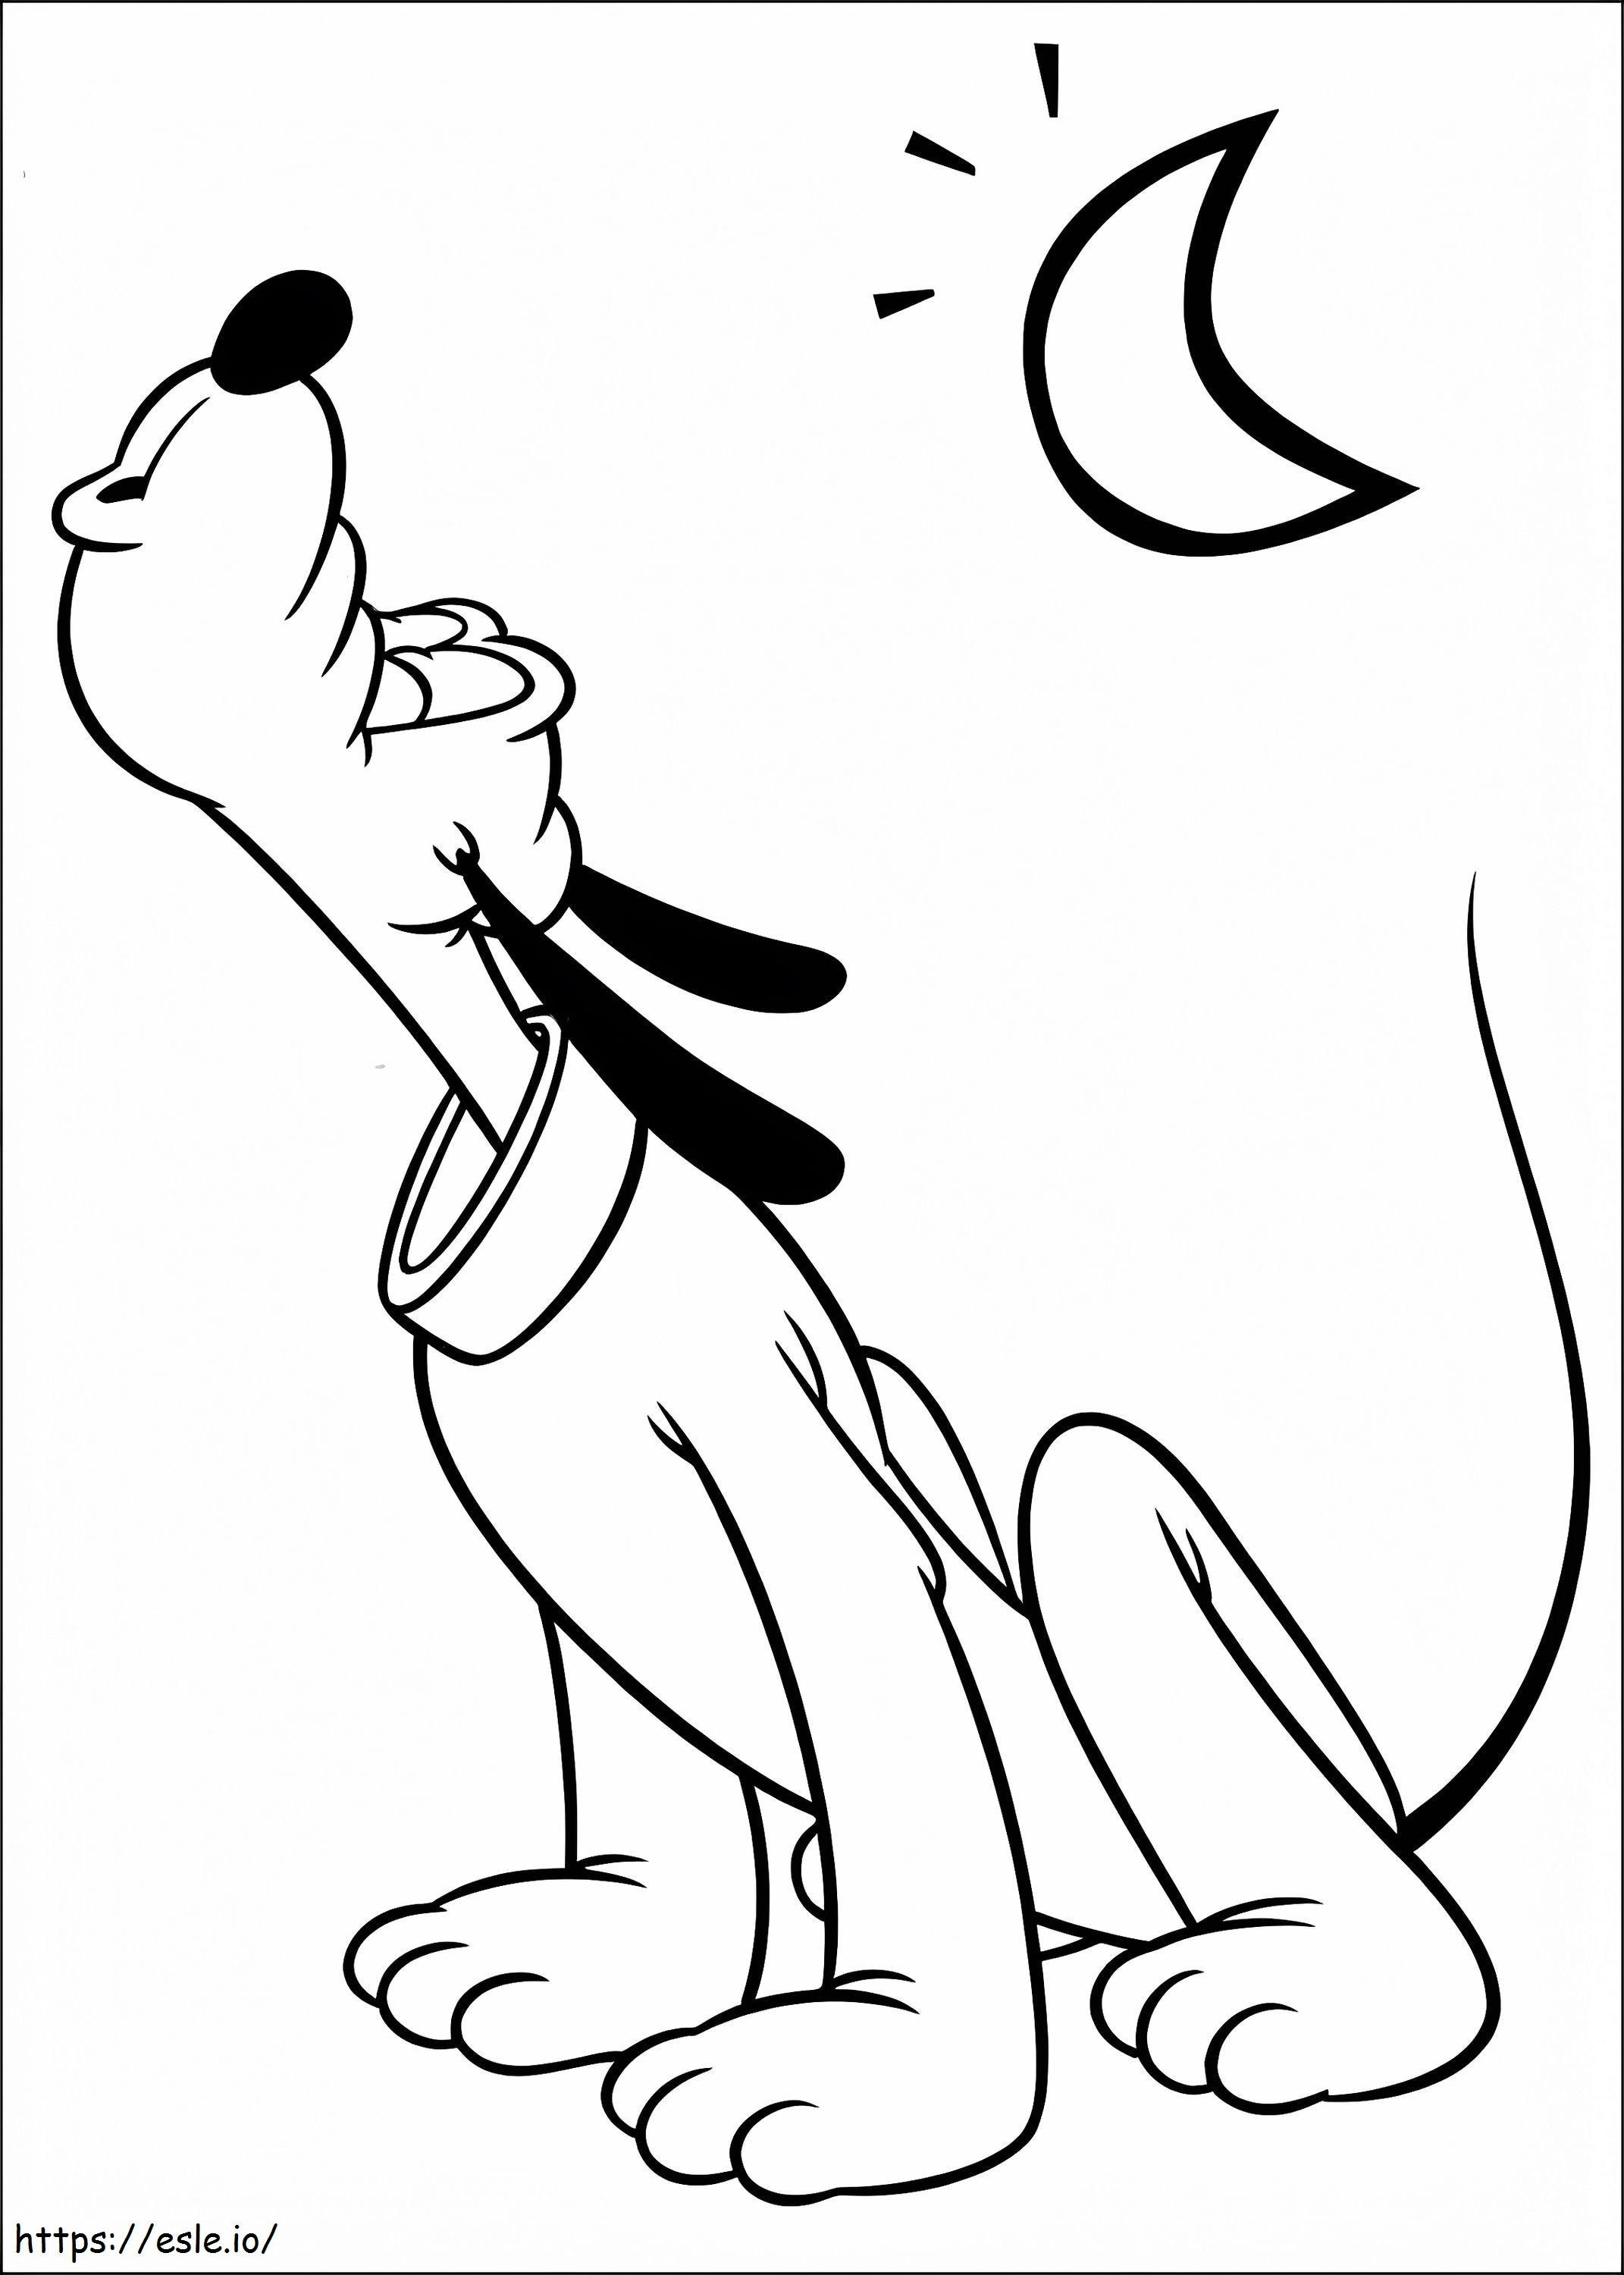 Perfect Pluto coloring page